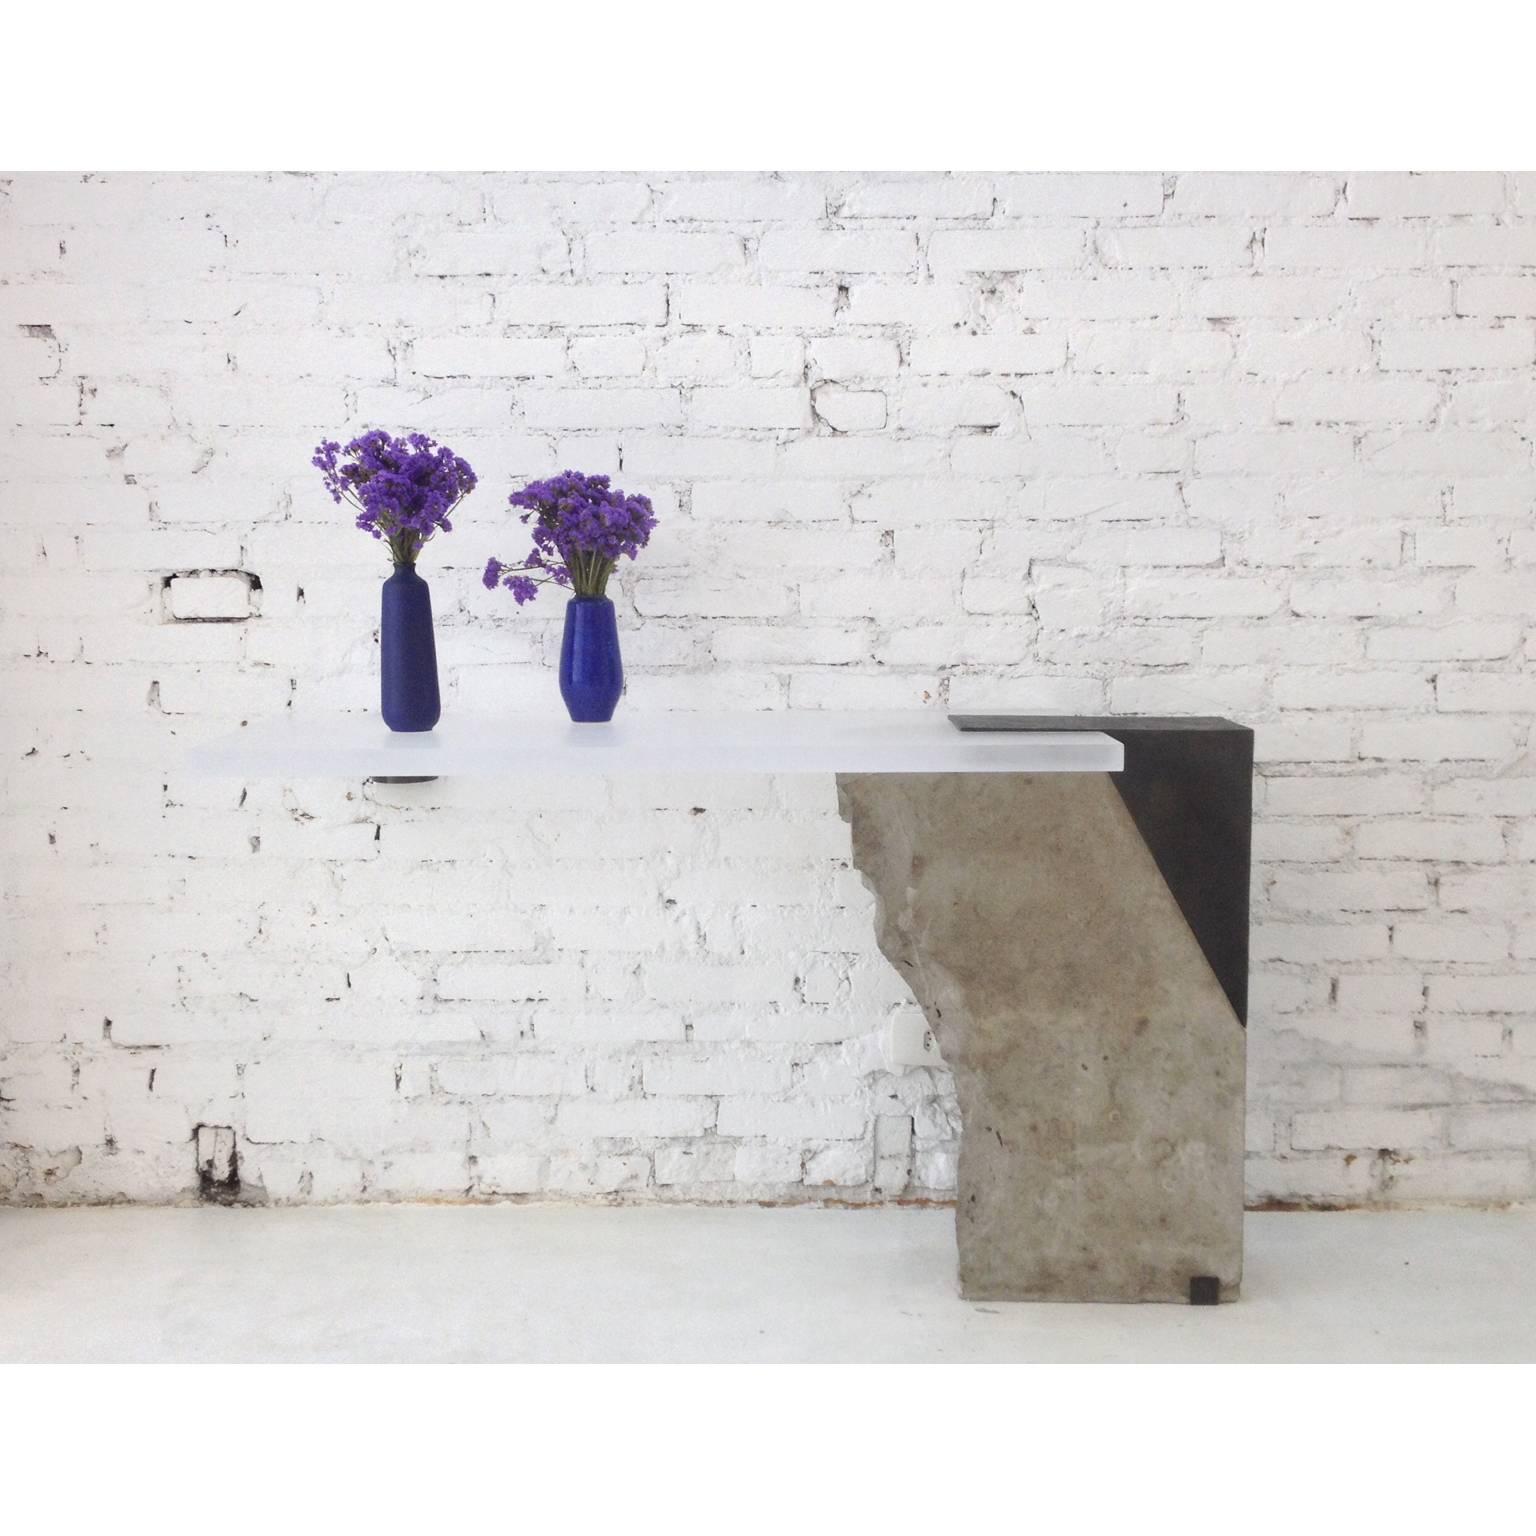 Pedra console table in  stone (limestone), metal (brass) darkened with manual treatment, manually sanded acrylic.
Designer: Gustavo Neves
Aeon collection
Brazil
2017
For this project, Gustavo Neves designed the collection Æon testing the boundaries